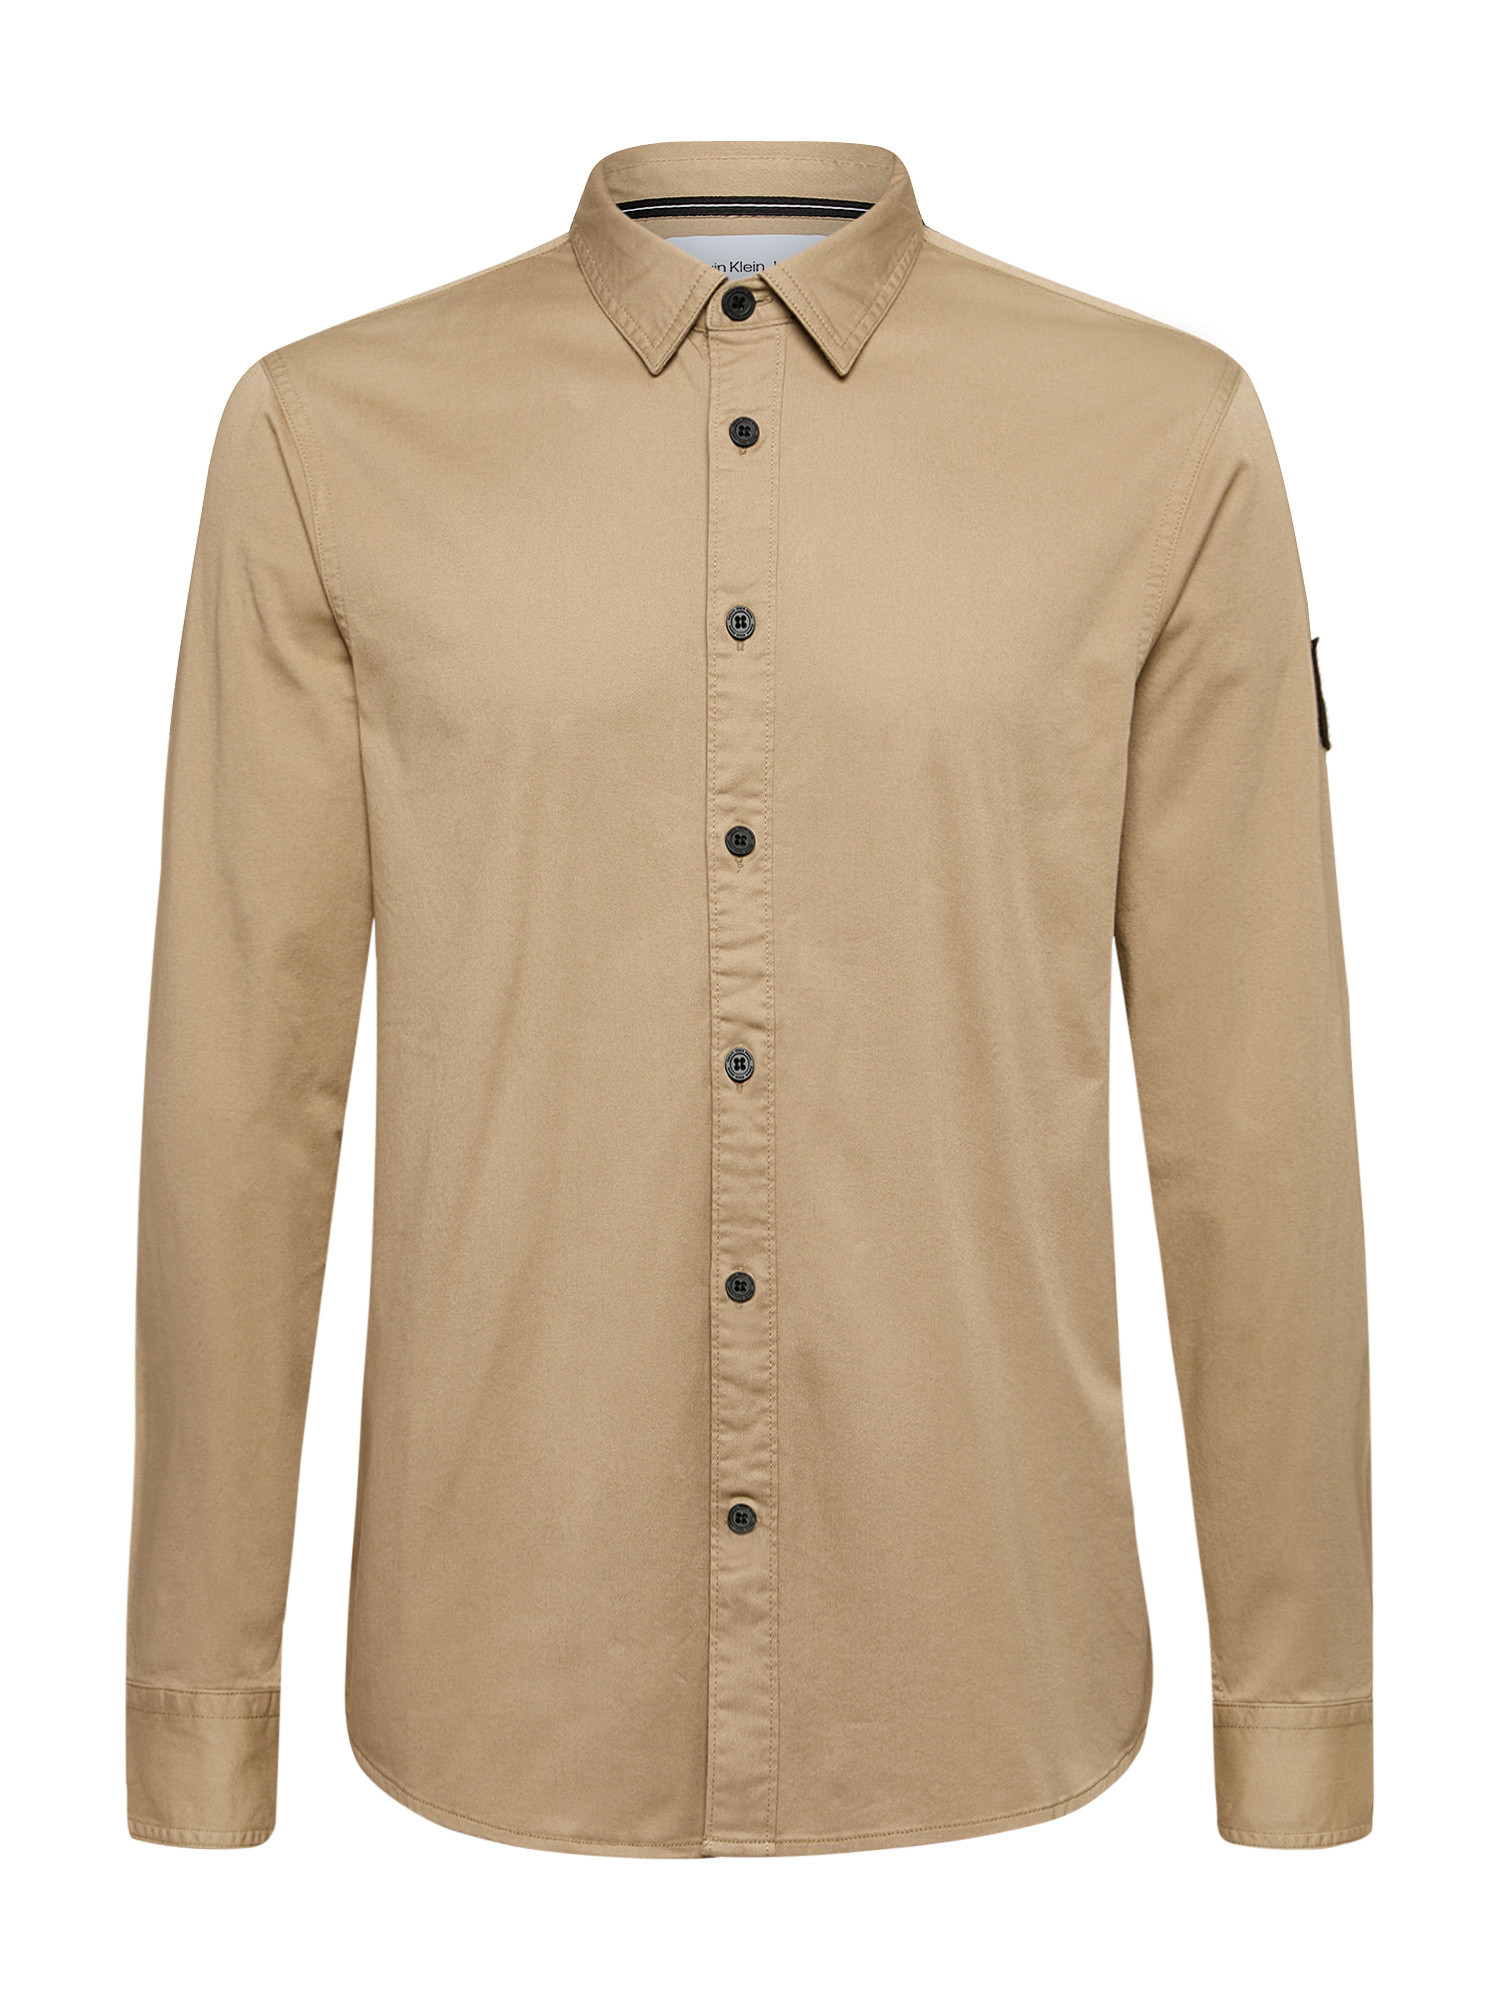 Calvin Klein Jeans -Camicia con logo, Beige scuro, large image number 0